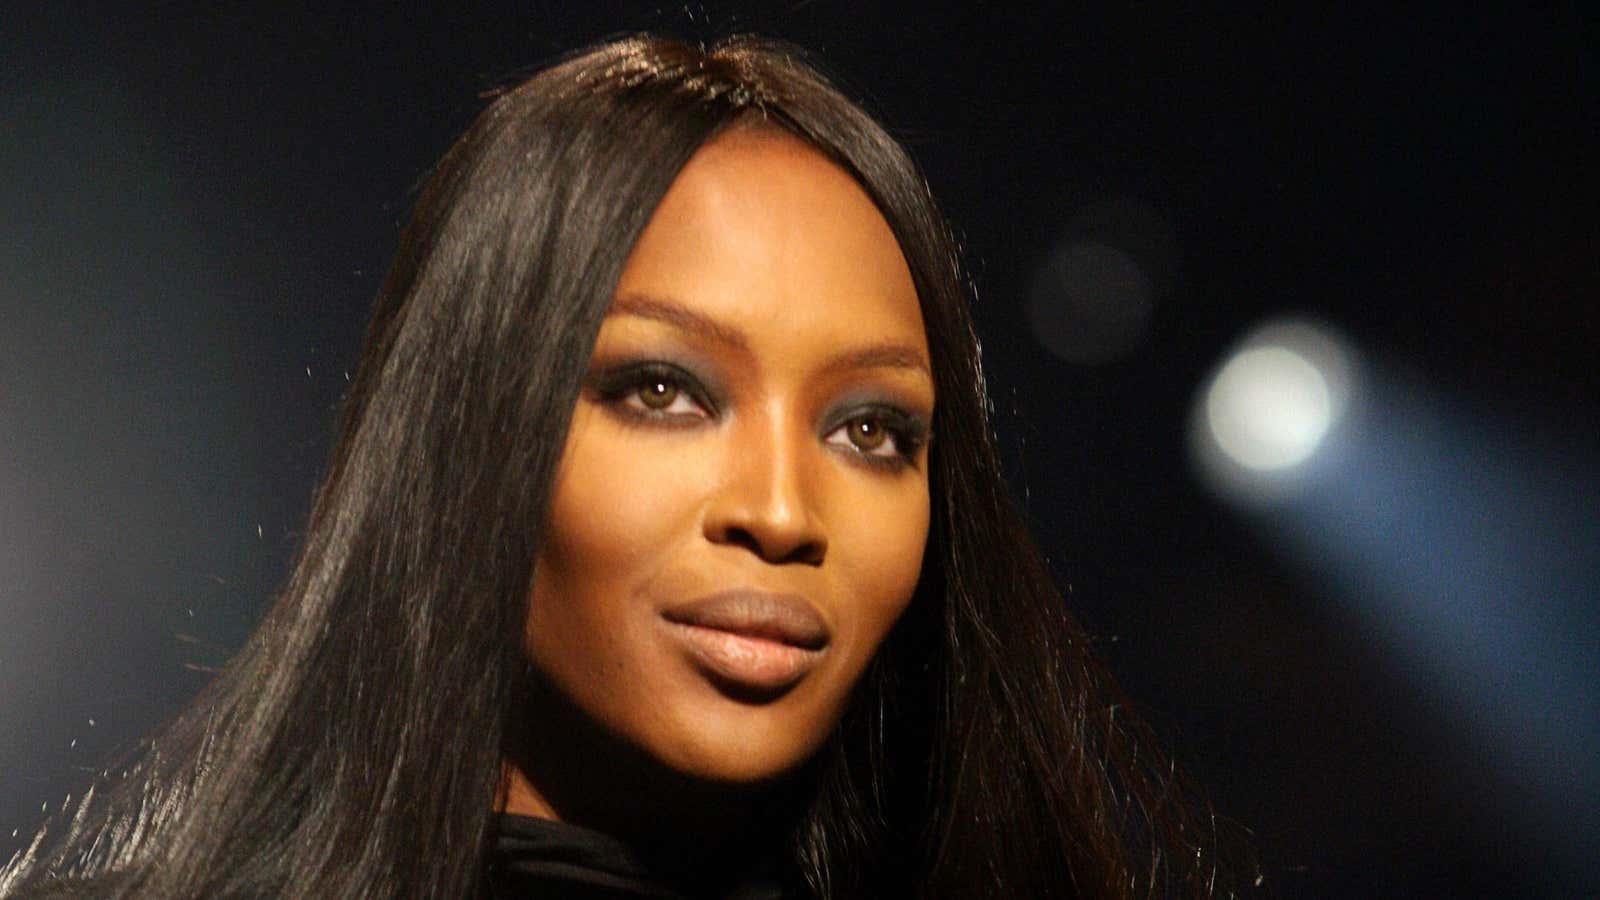 Model Naomi Campbell announces on Twitter that she has shot with a black photographer for the first time in her 33-year career.